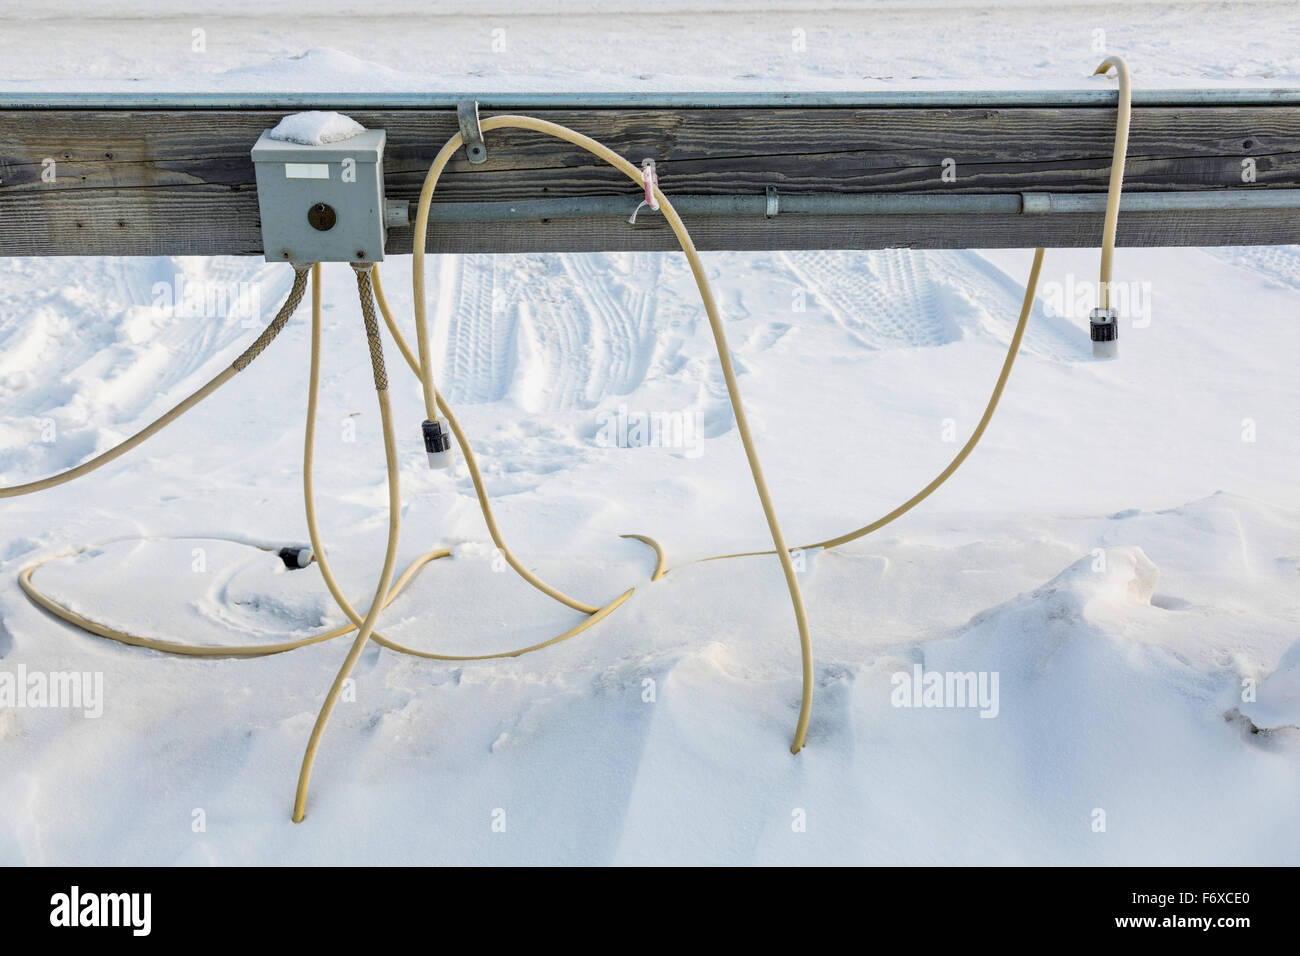 Detail view of extension cords buried in snow running from an outdoor power outlet,  Barrow, North Slope, Arctic AK, USA, Winter Stock Photo